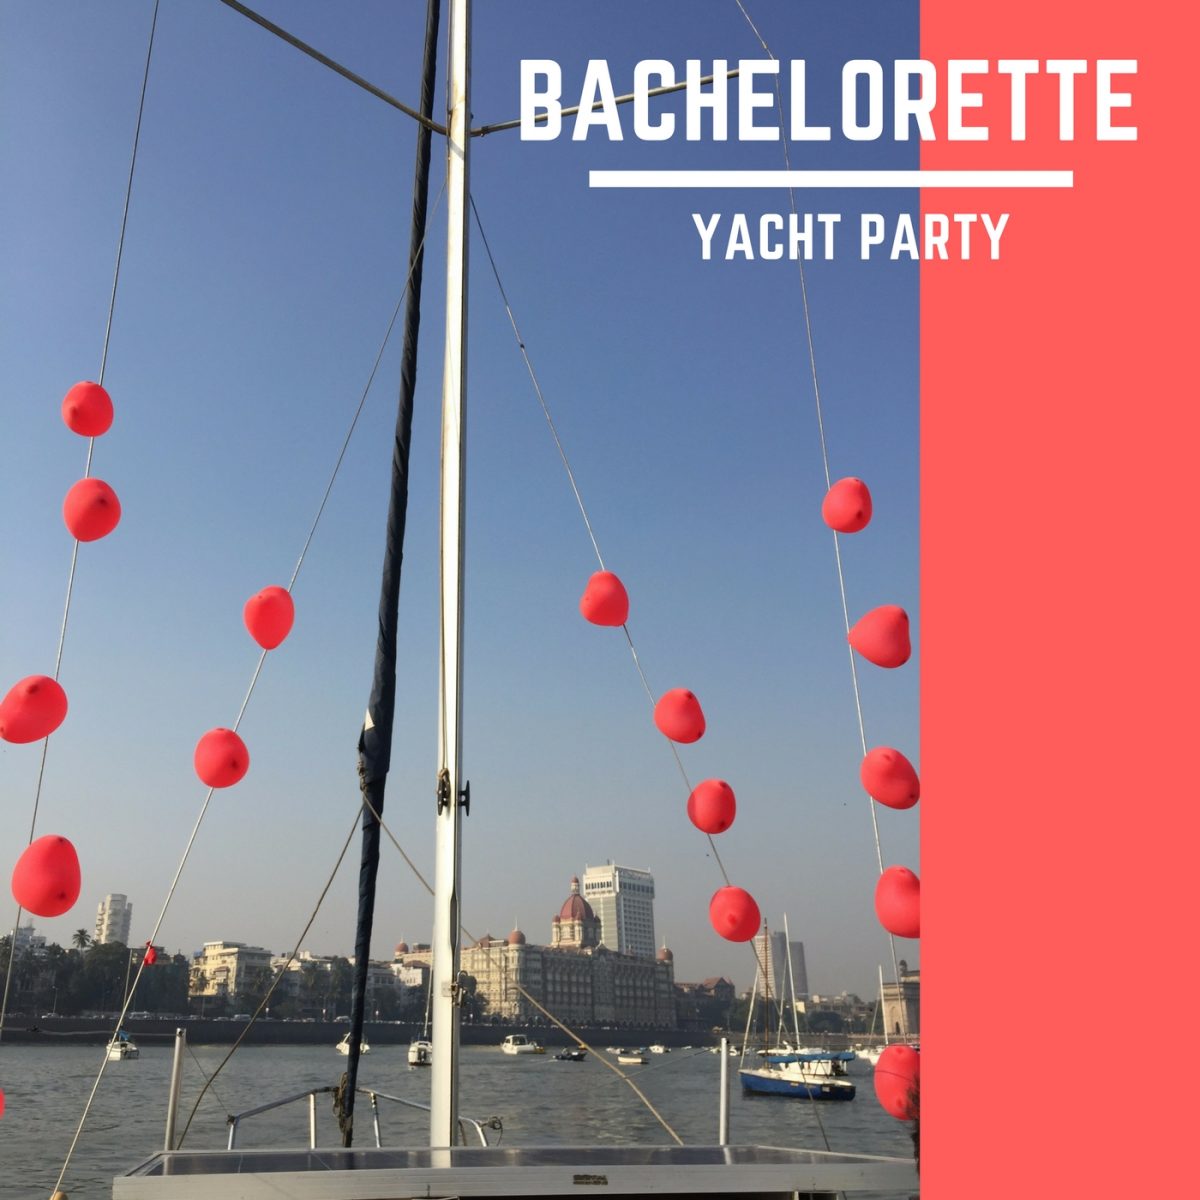 The Bachelorette Bash on a Yacht in India